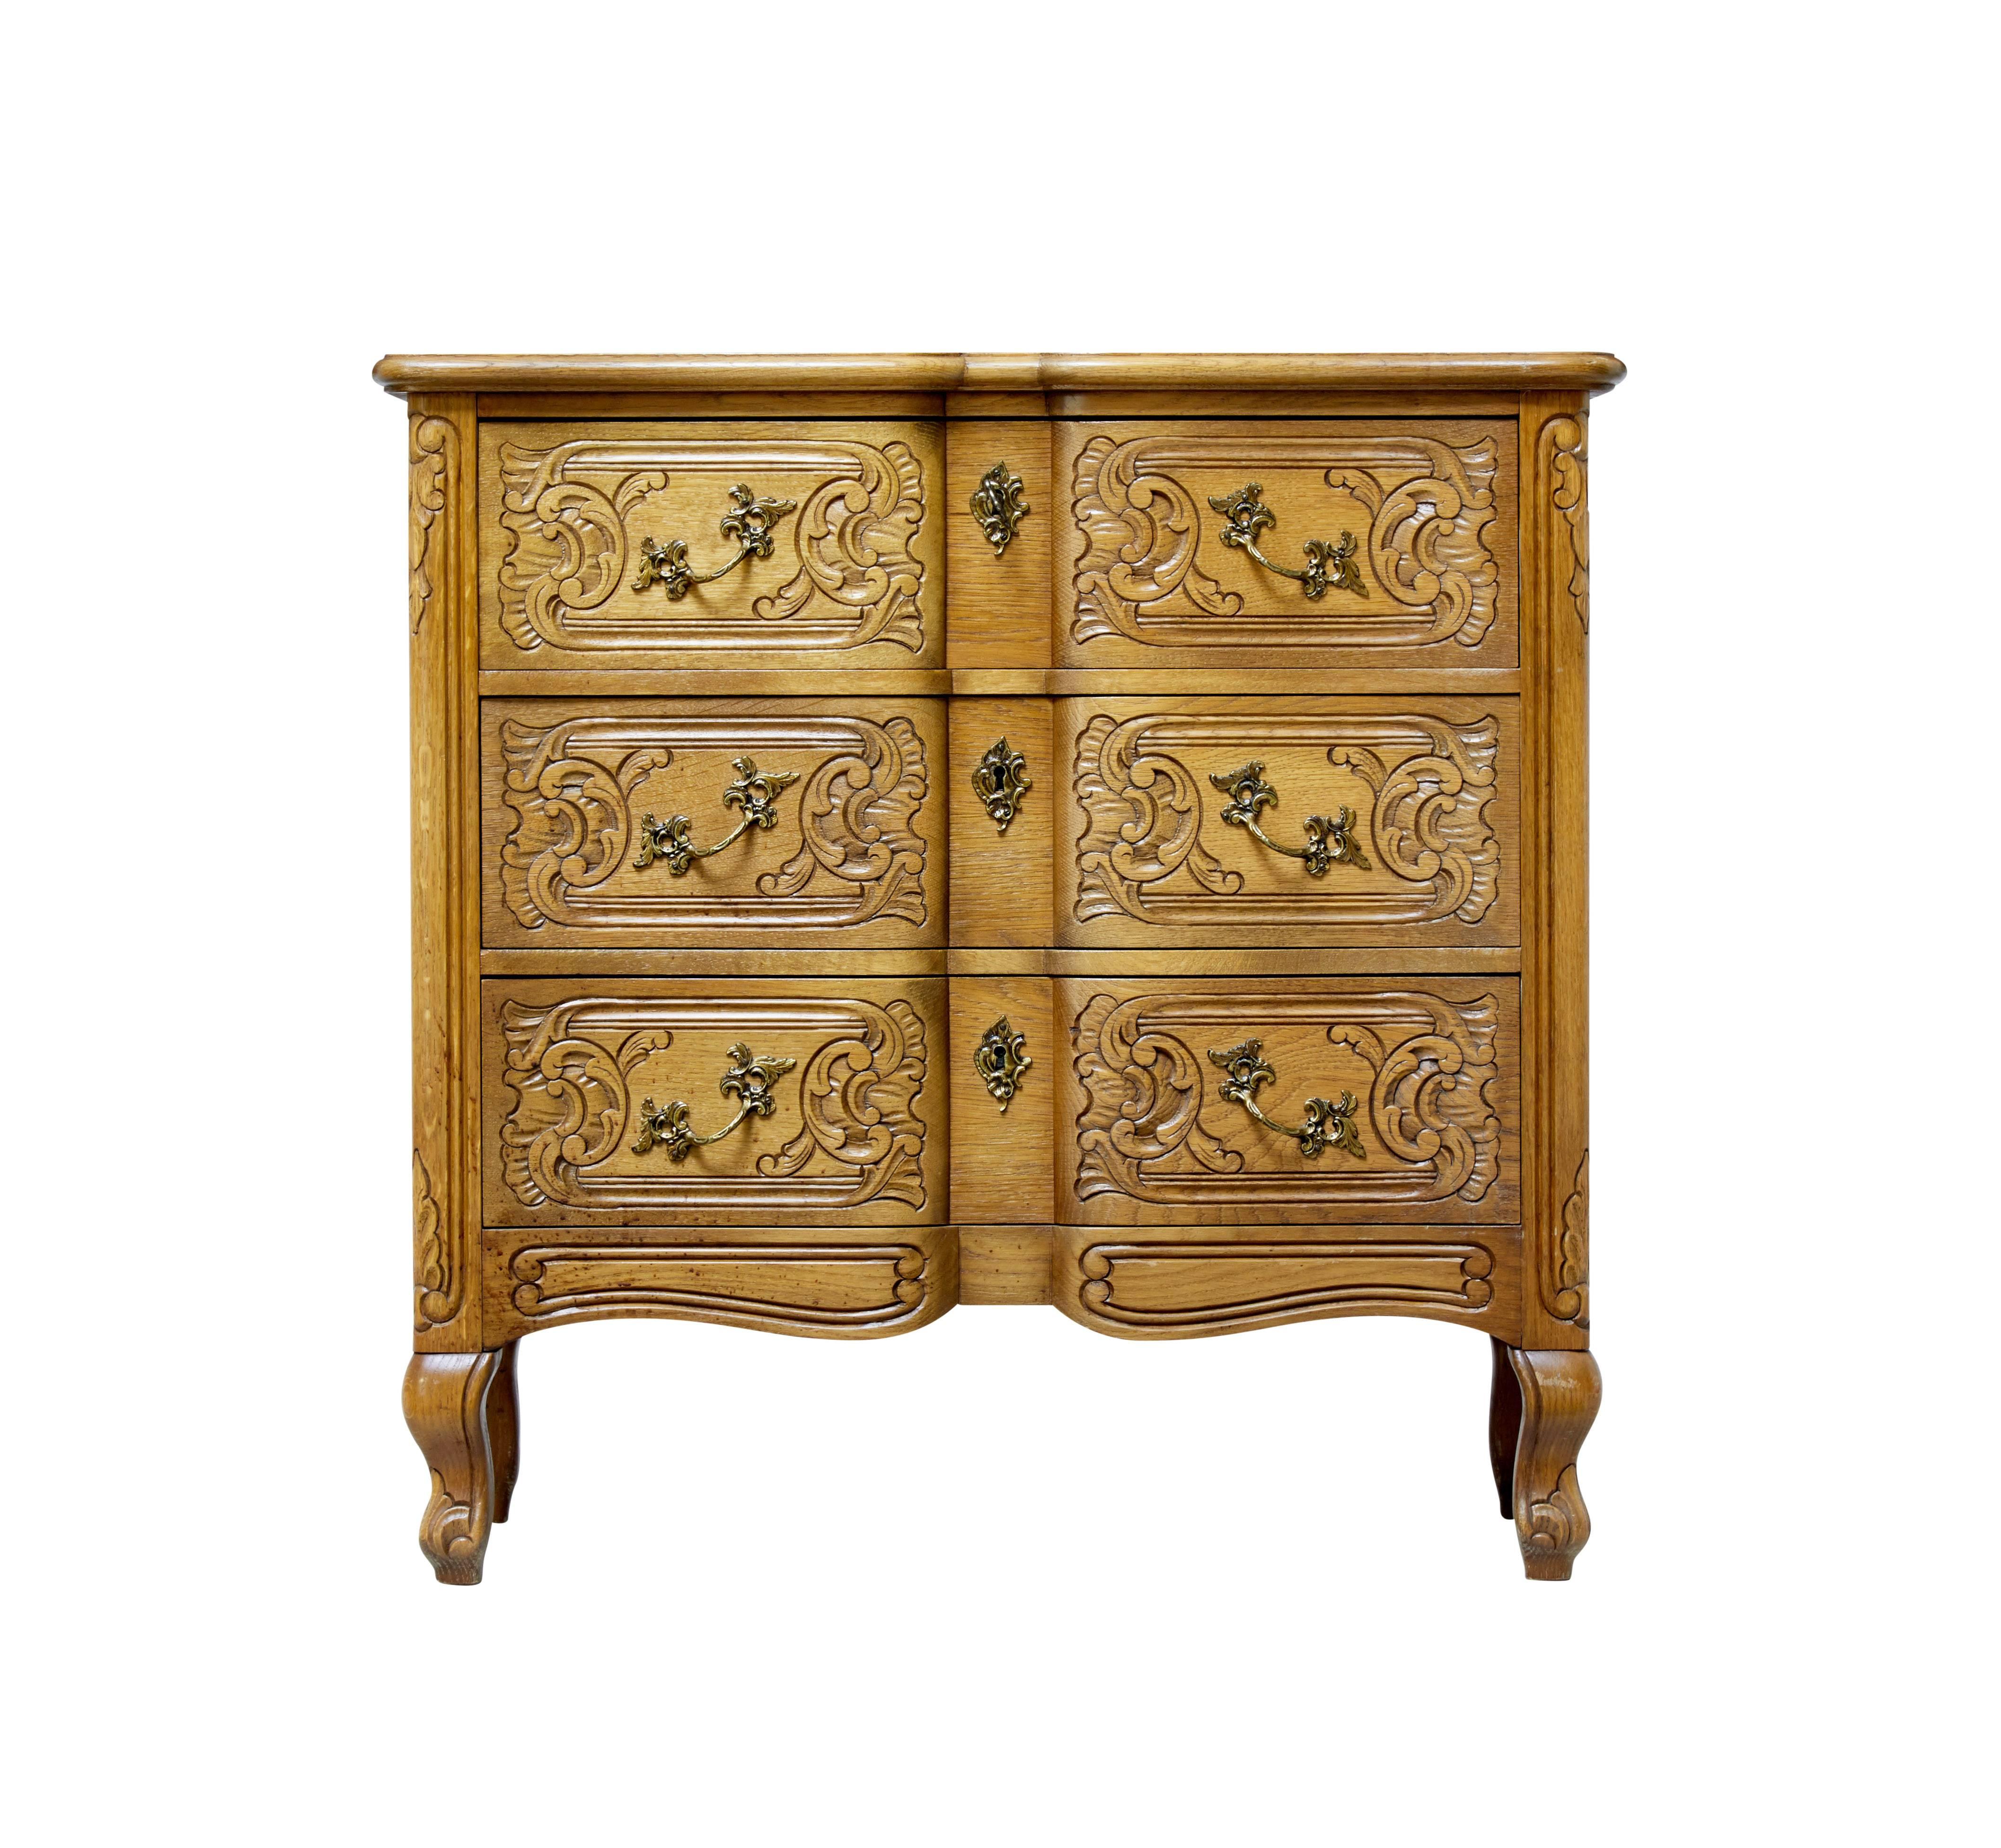 Carved oak commode of small proportions, circa 1950.

Practical small chest of drawers in the Baroque taste. Three block fronted drawers with carving in the solid. With decorative handles.

Light oak color.

Restoration to veneer on back edge.